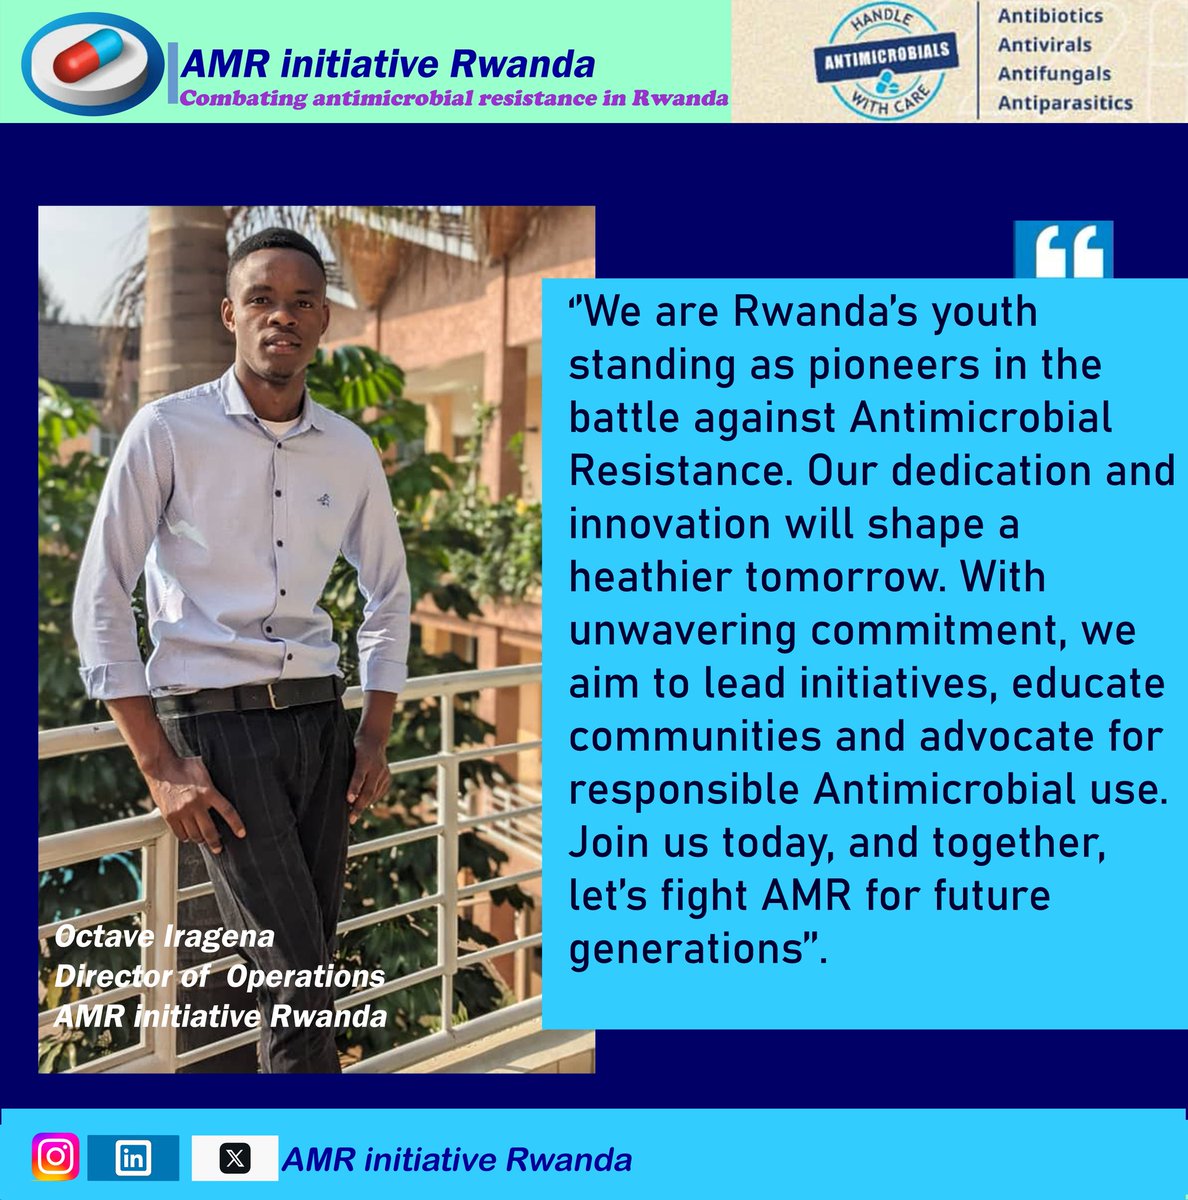 #MeetTheTeam.

@amr_initiative, We  envision a Rwanda🇷🇼 where #Antimicrobials are used responsibly. Preserving their effectiveness for current & future generations, with empowered #Youth at the forefront of this transformative change. We want this in #Rwanda. 

#YouthagainstAMR